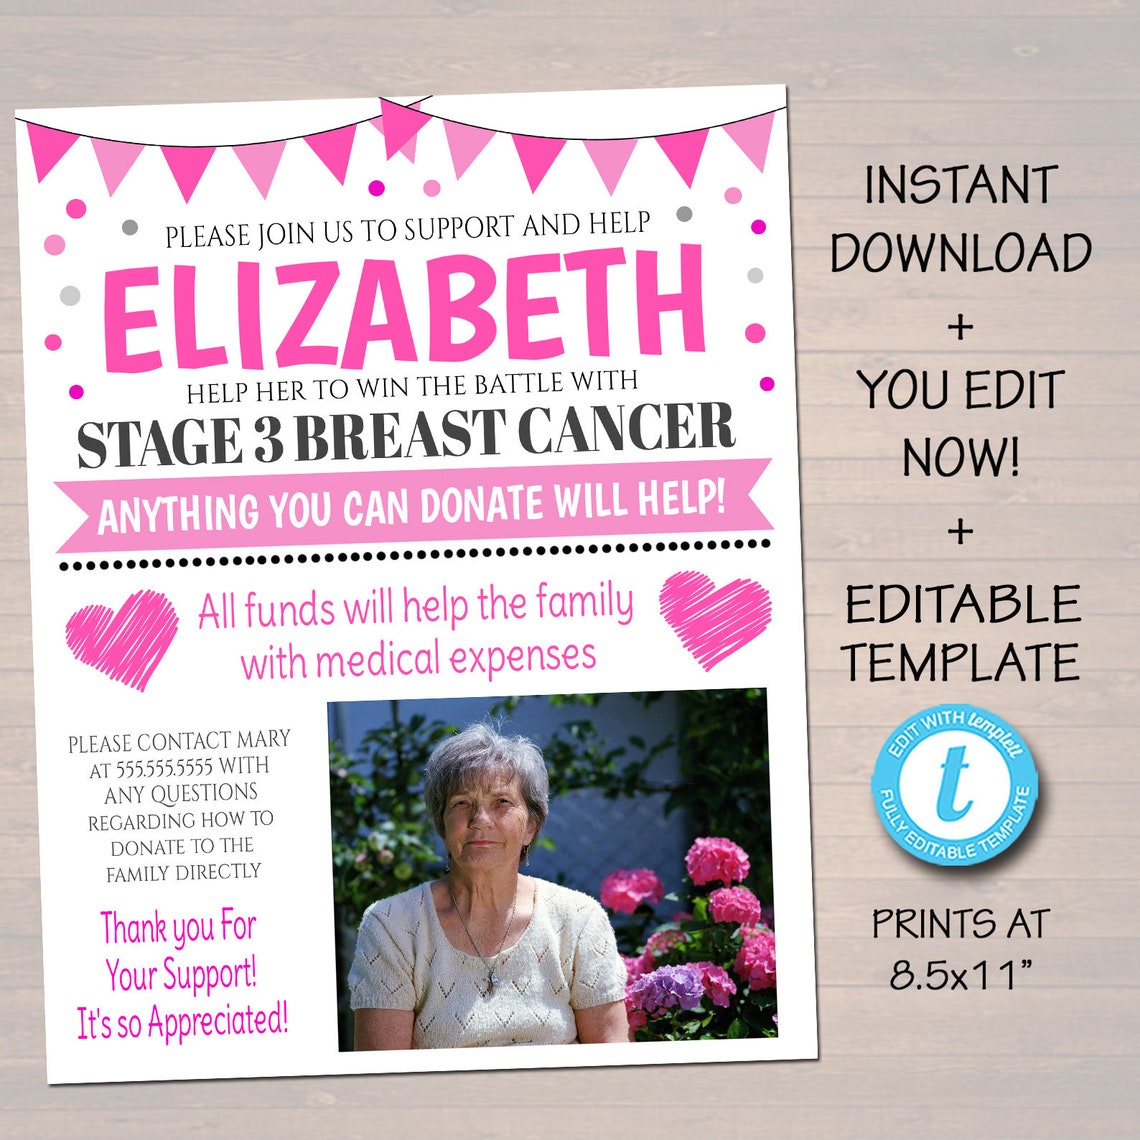 breast-cancer-benefit-fundraiser-flyer-printable-pink-charity-etsy-canada